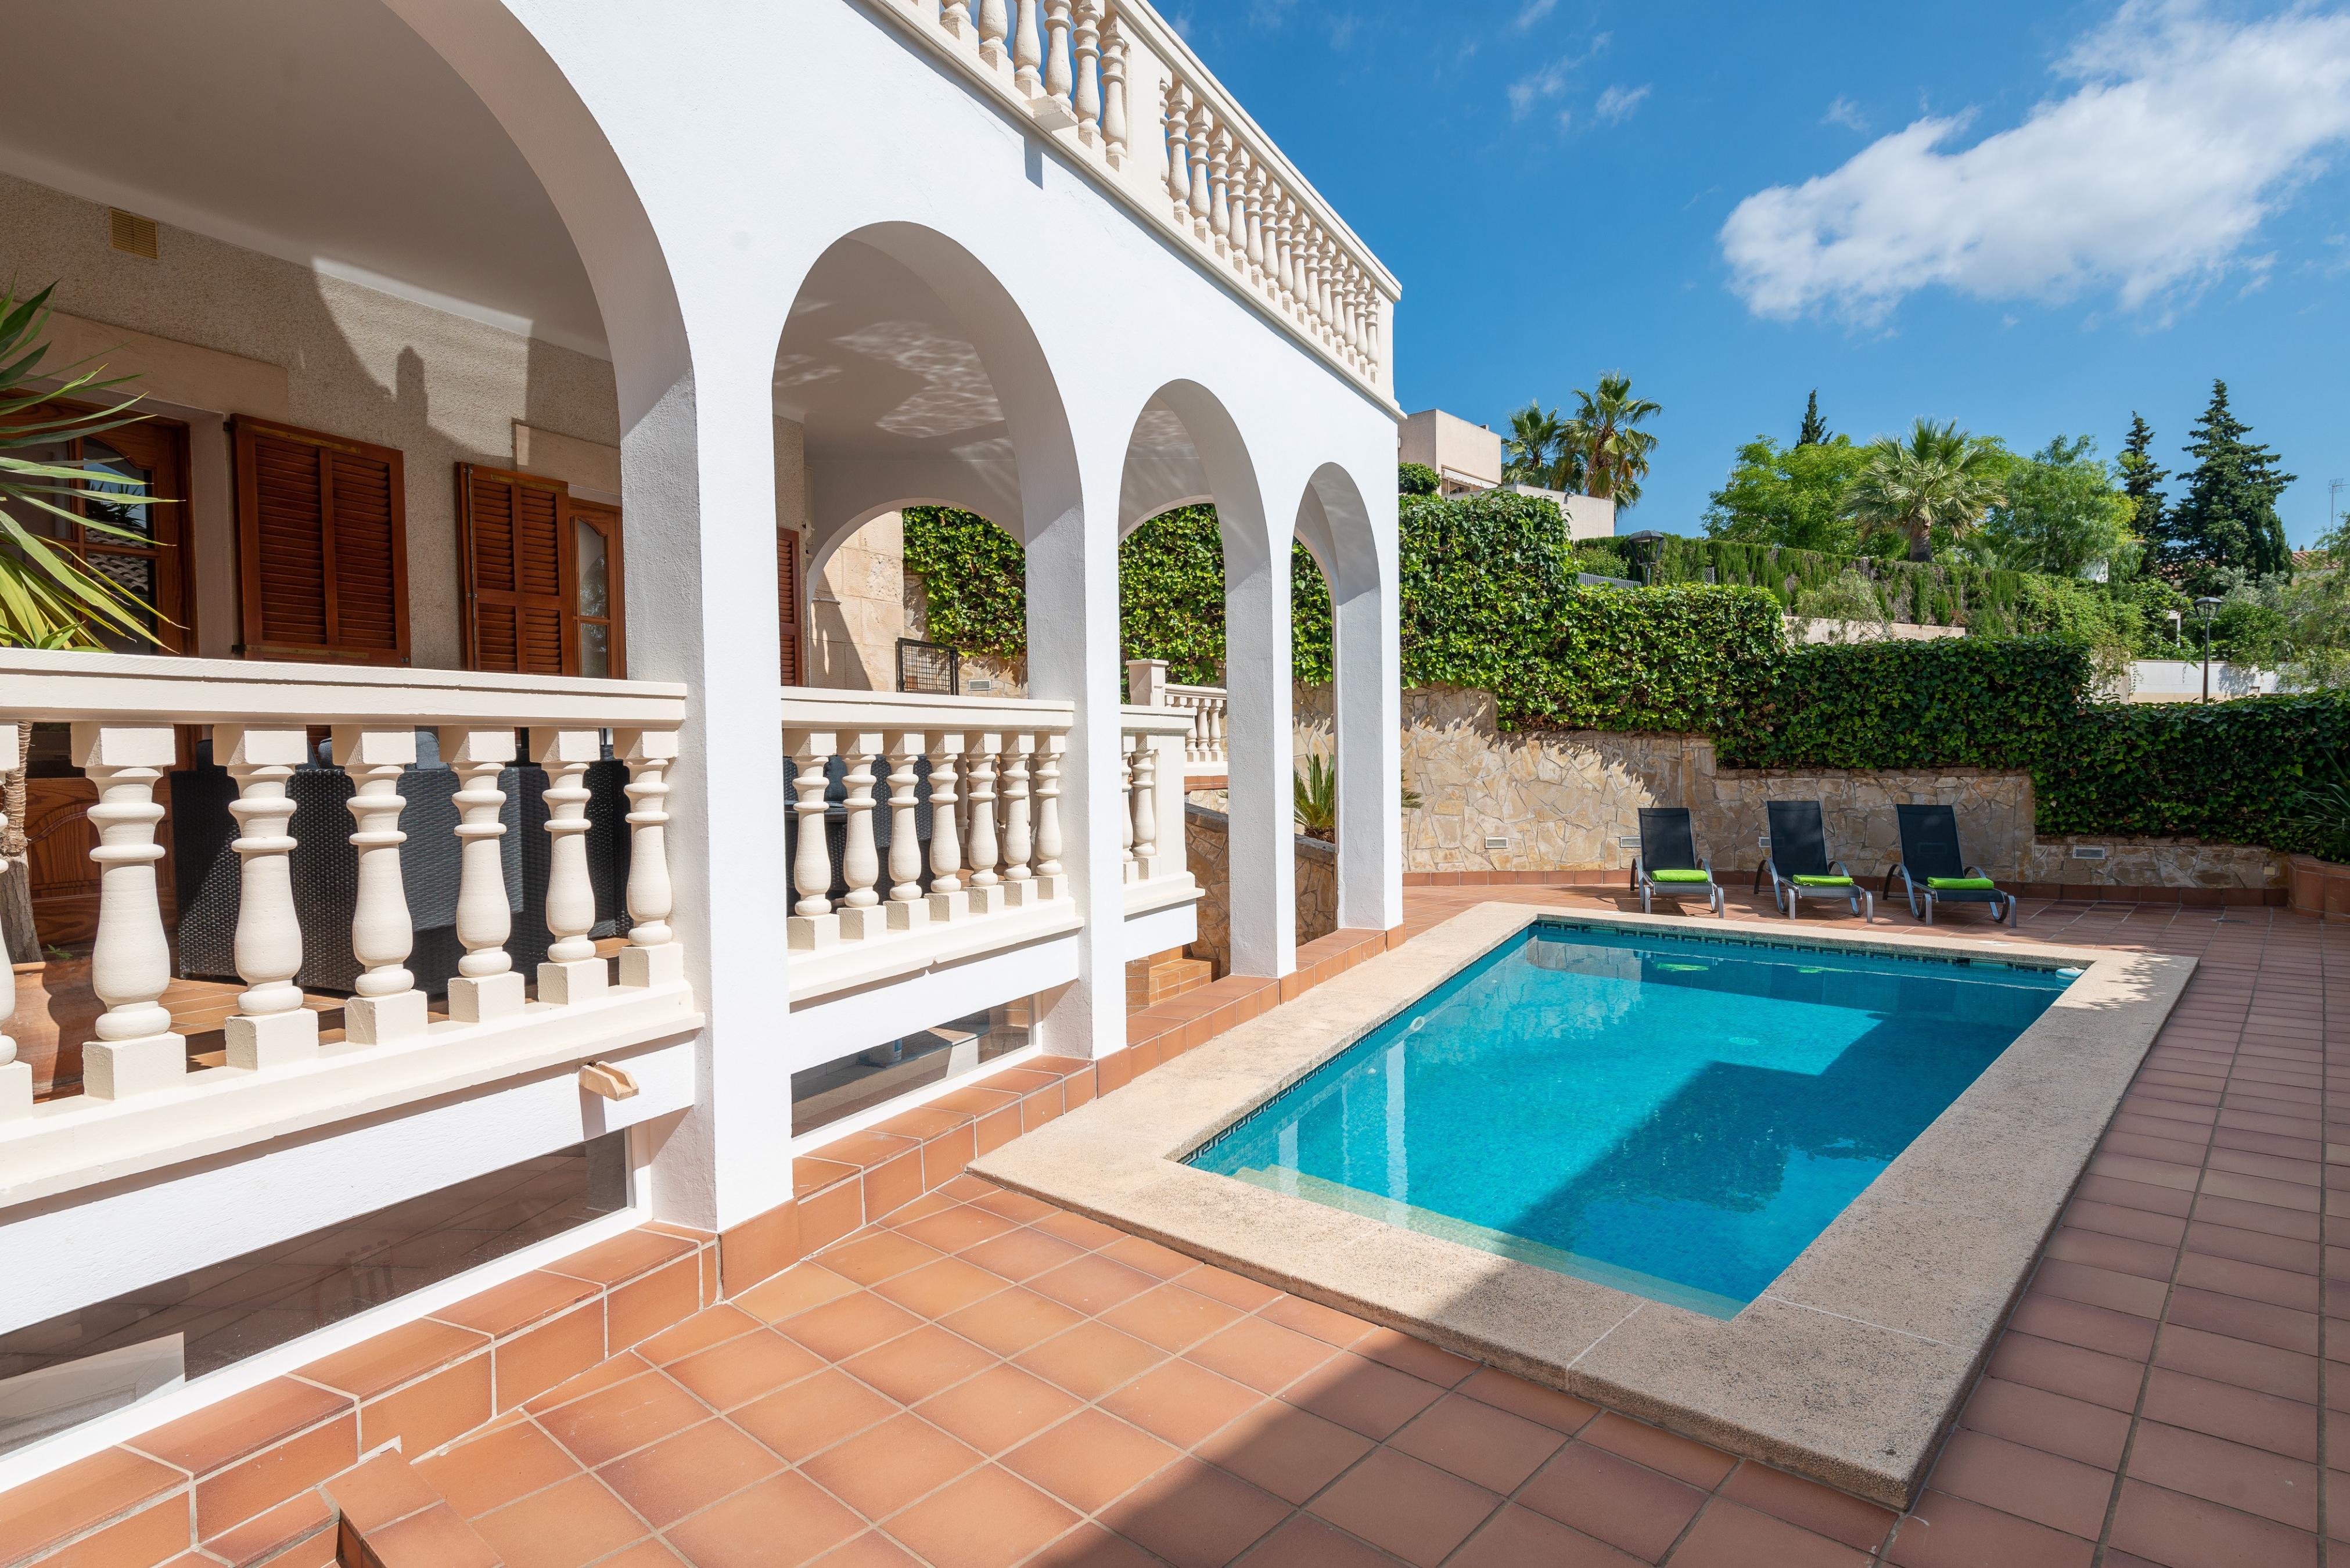 Property Image 2 - VILLA TEULERA -Amazing house in Palma, with private pool and 3.6 km away from the beach. Free WiFi